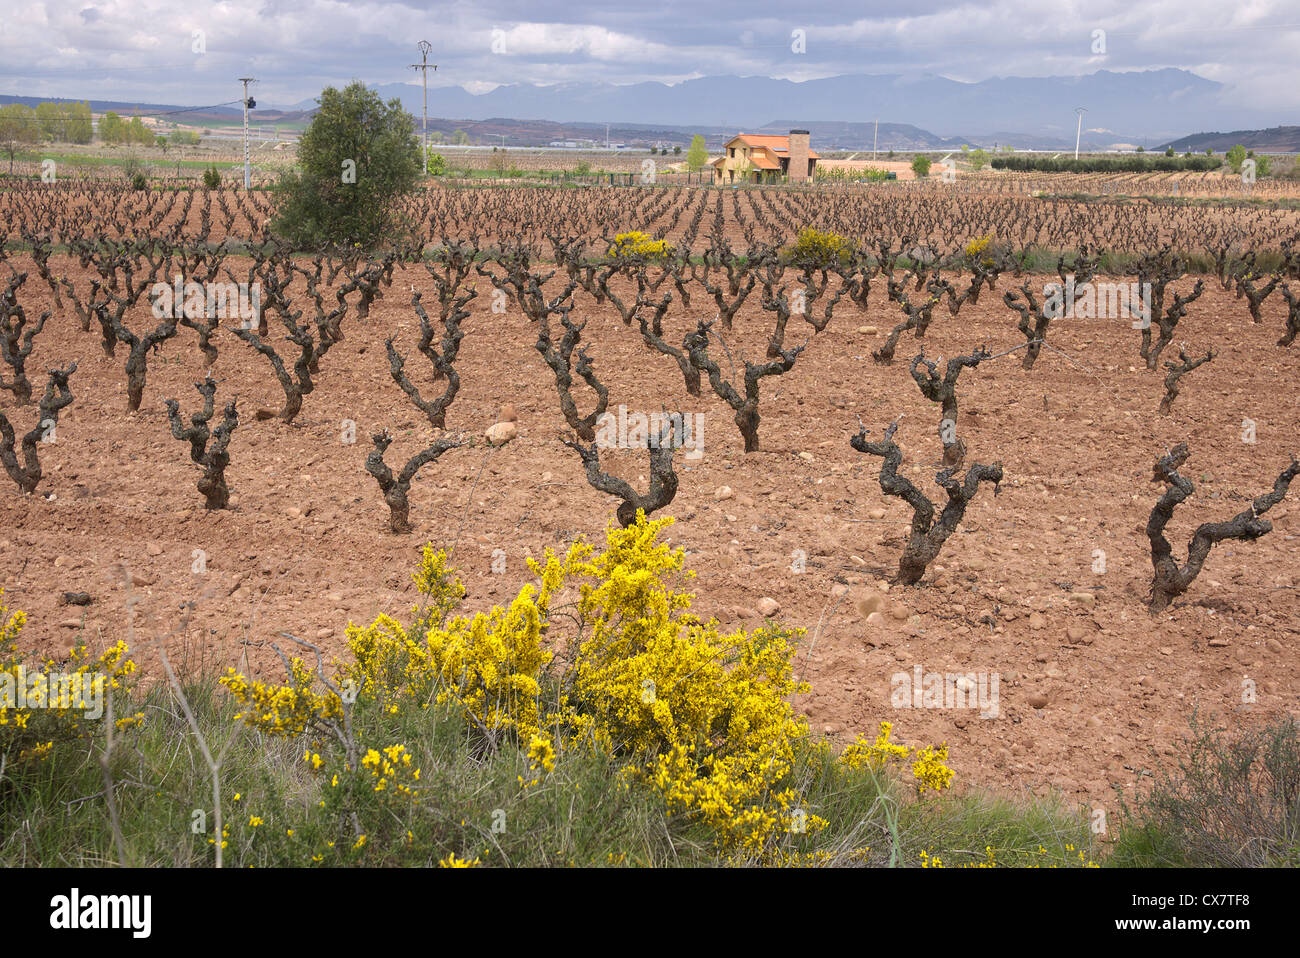 Vineyards in the Rioja region of Spain seen in early springtime. Stock Photo